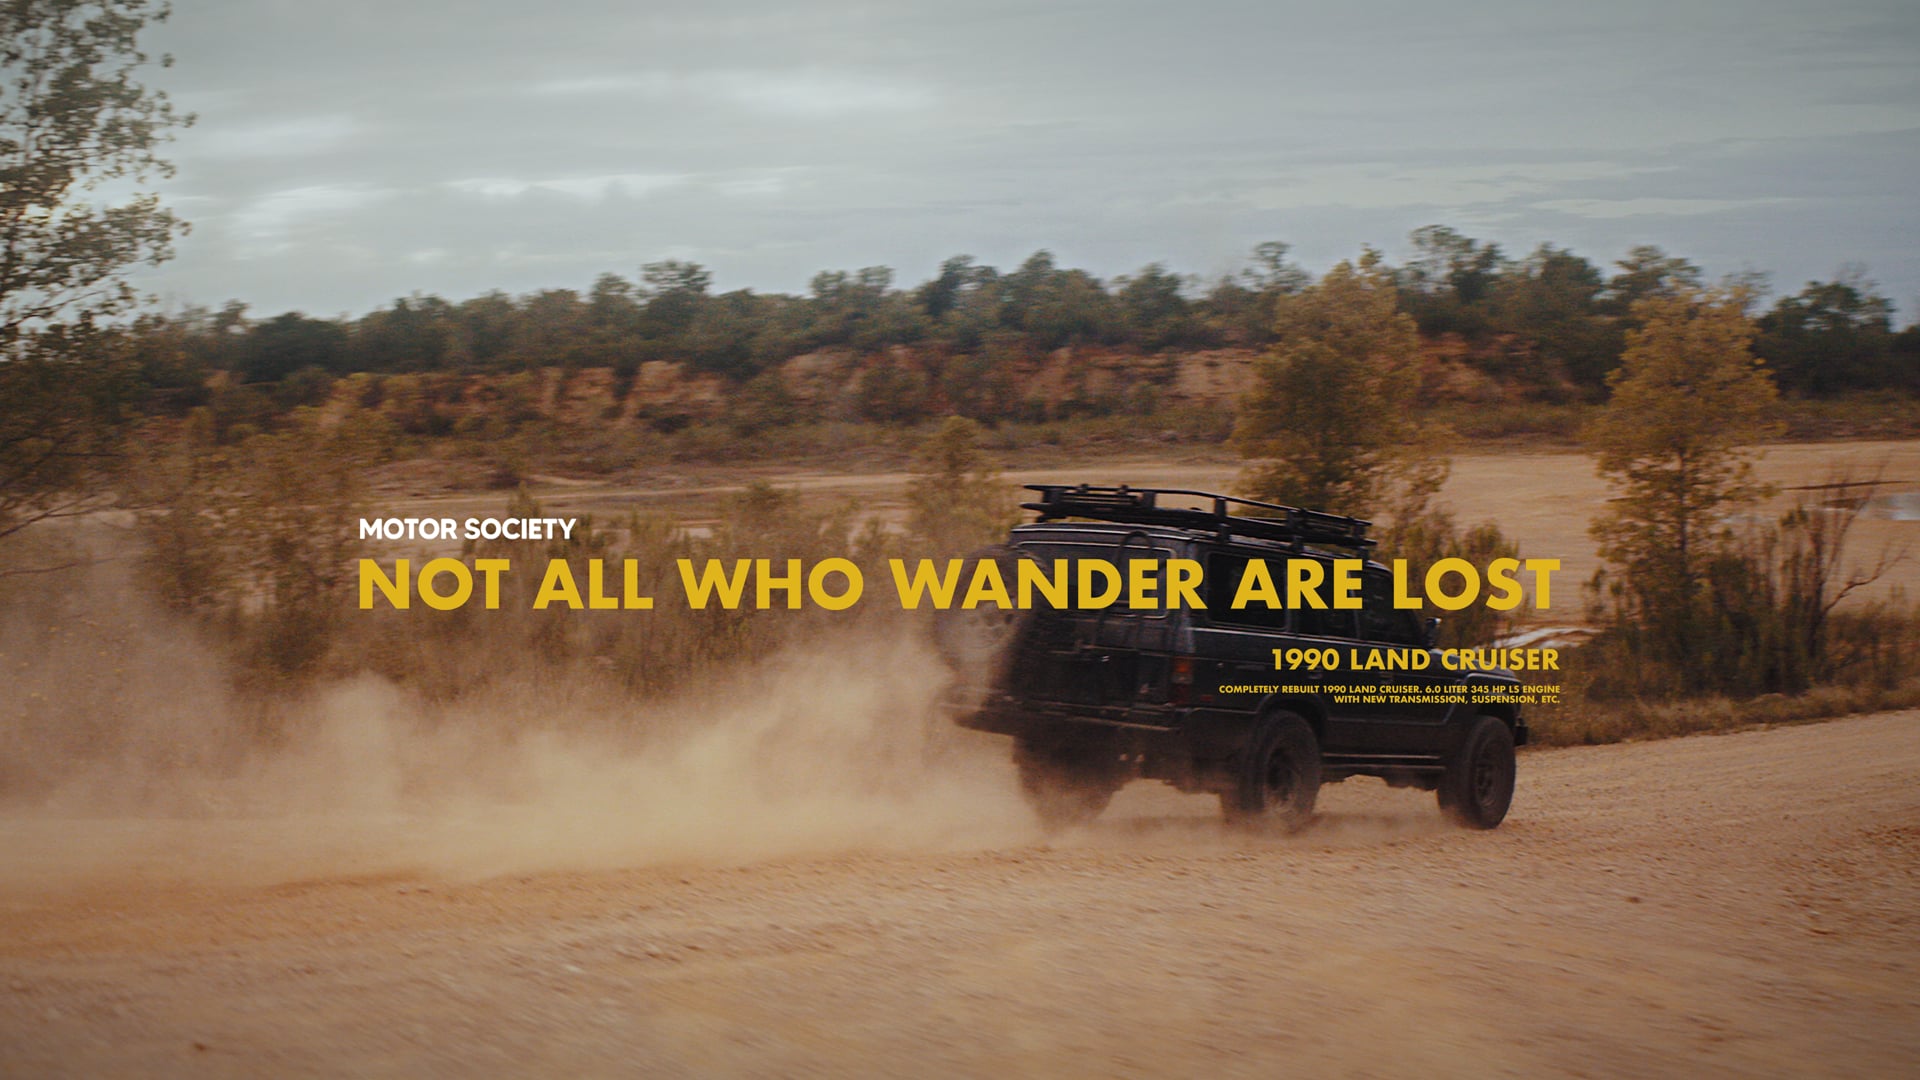 Brand Film: ‘Not All Who Wander Are Lost’ - Motor Society